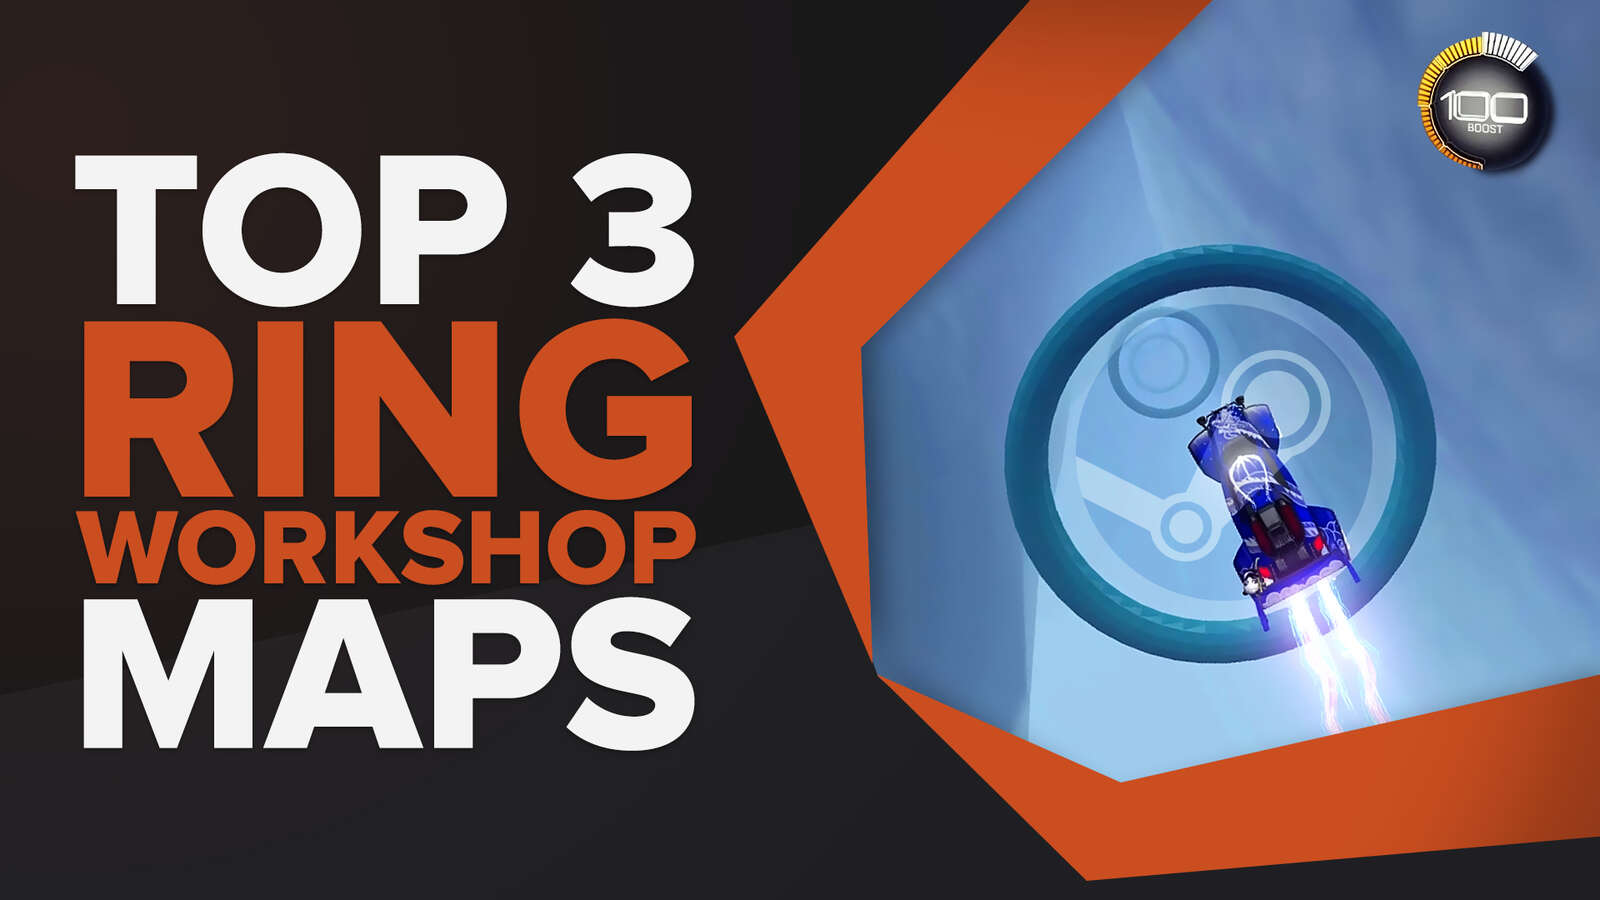 Top 3 Rings Workshop Maps in Rocket League [With Links]